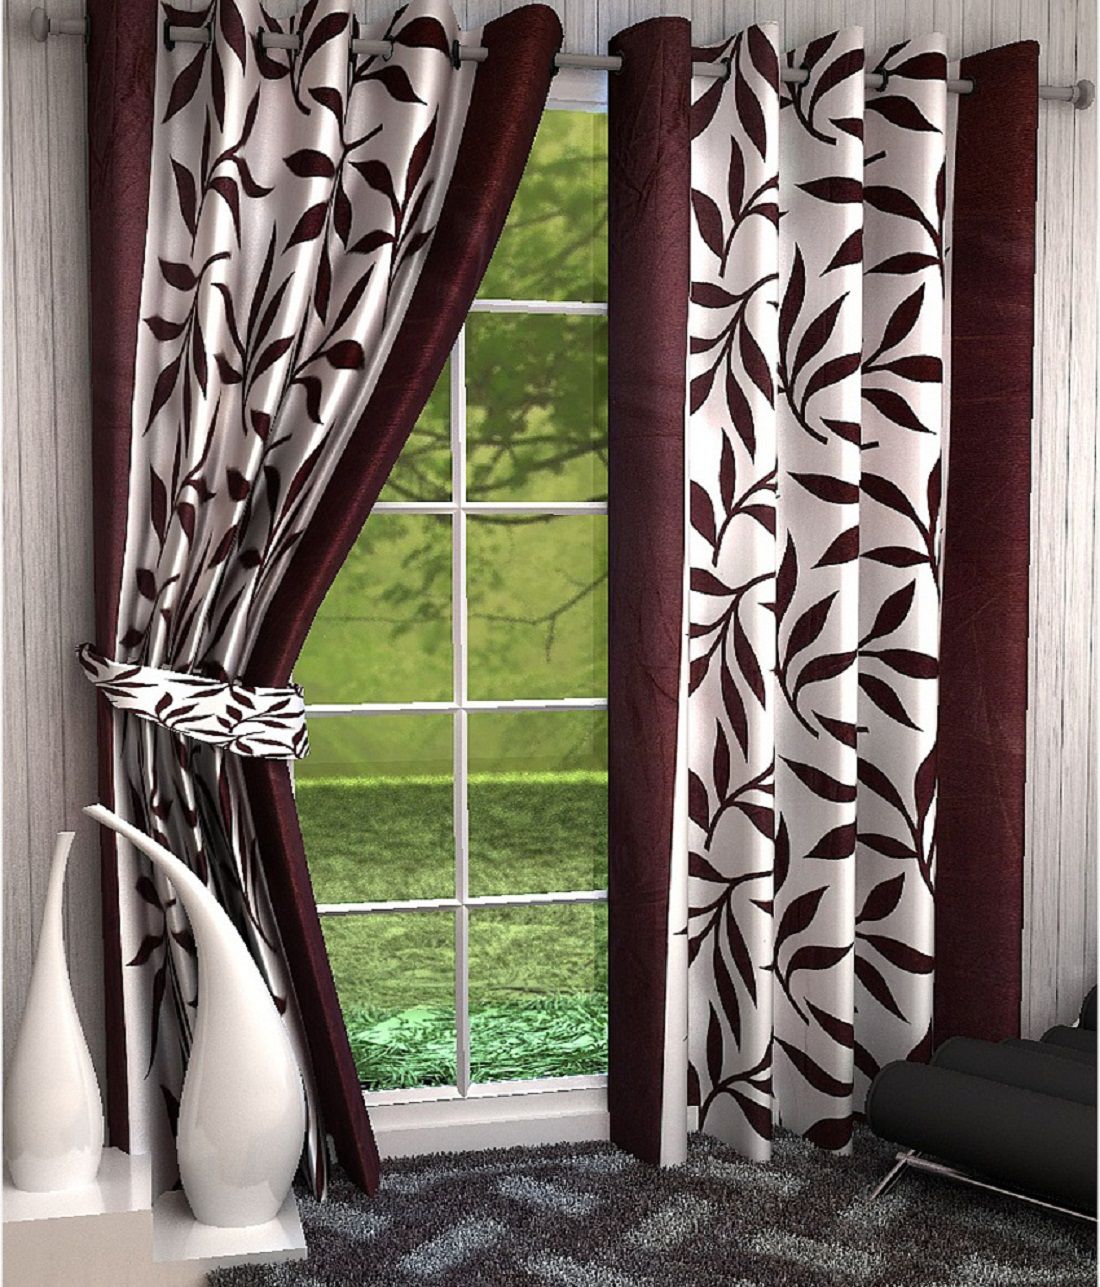     			Phyto Home Floral Semi-Transparent Eyelet Door Curtain 7 ft Pack of 4 -Brown